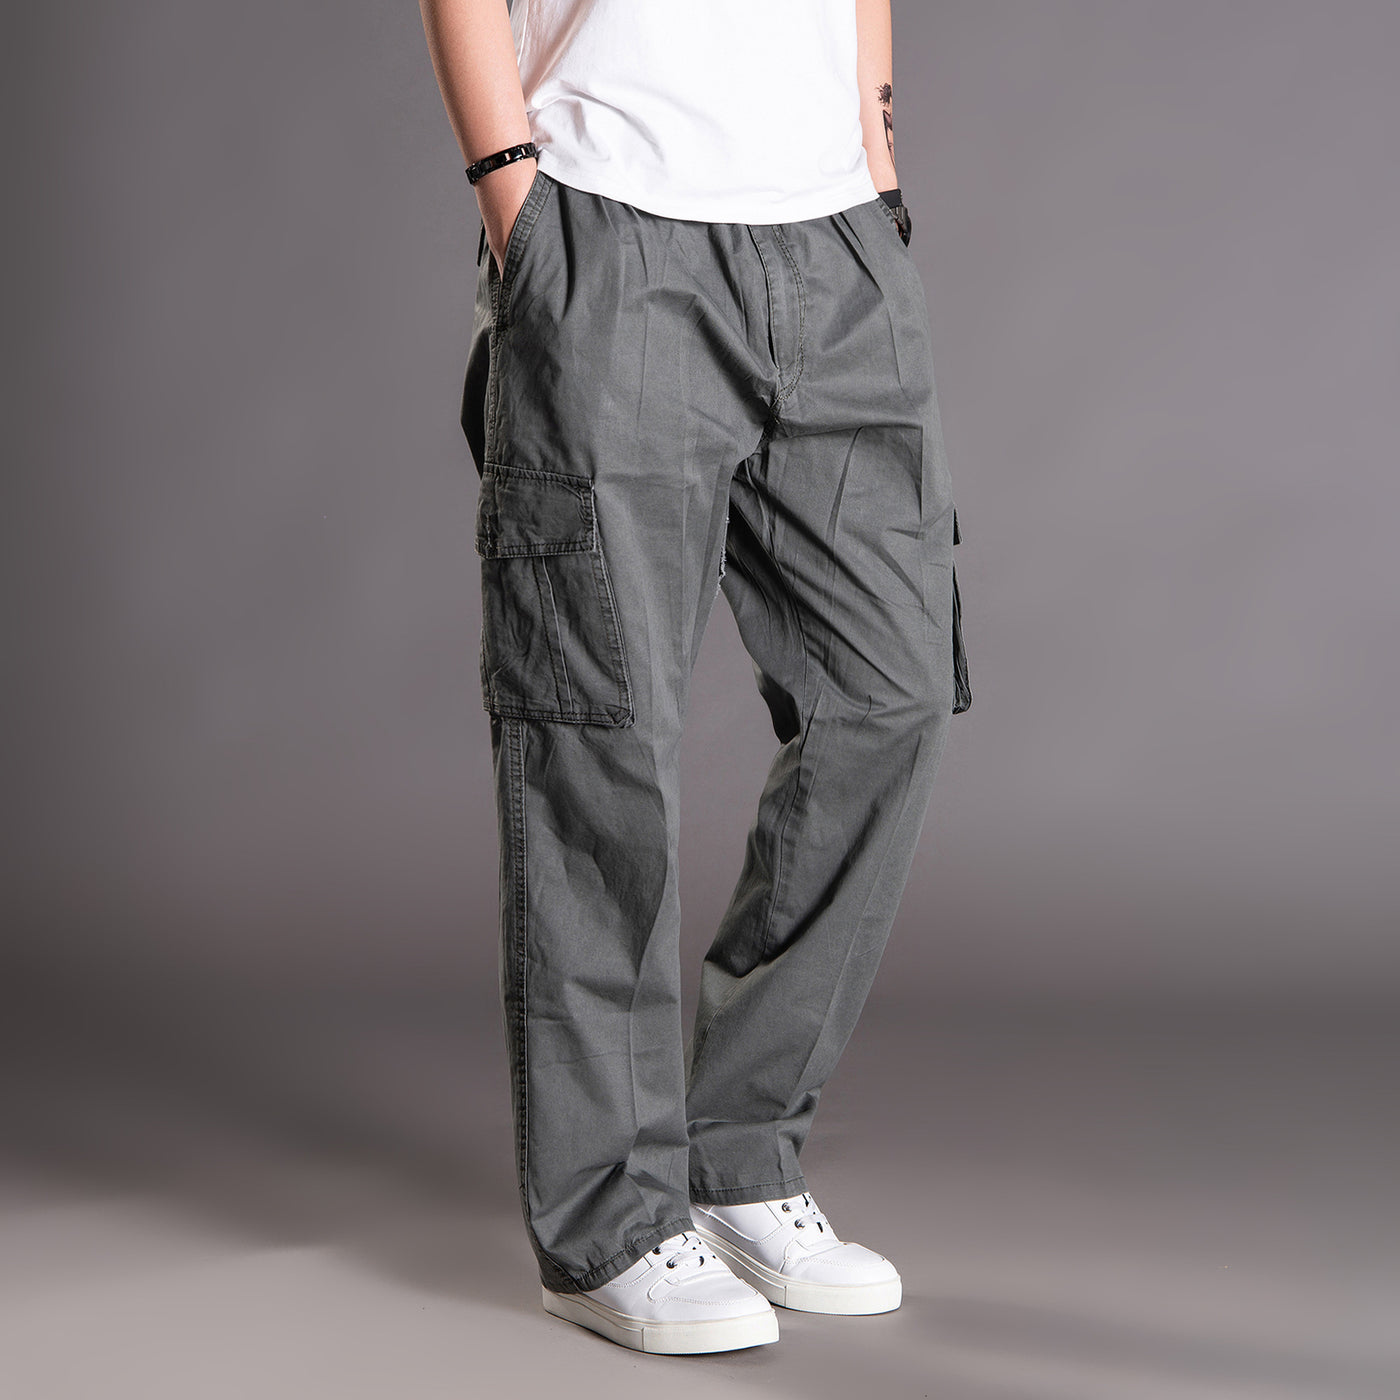 Korean Style Loose Straight Leg Thin Fat Pants - Comfortable Cotton Trousers for Spring - Army Green20 - Men's Pants - Carvan Mart